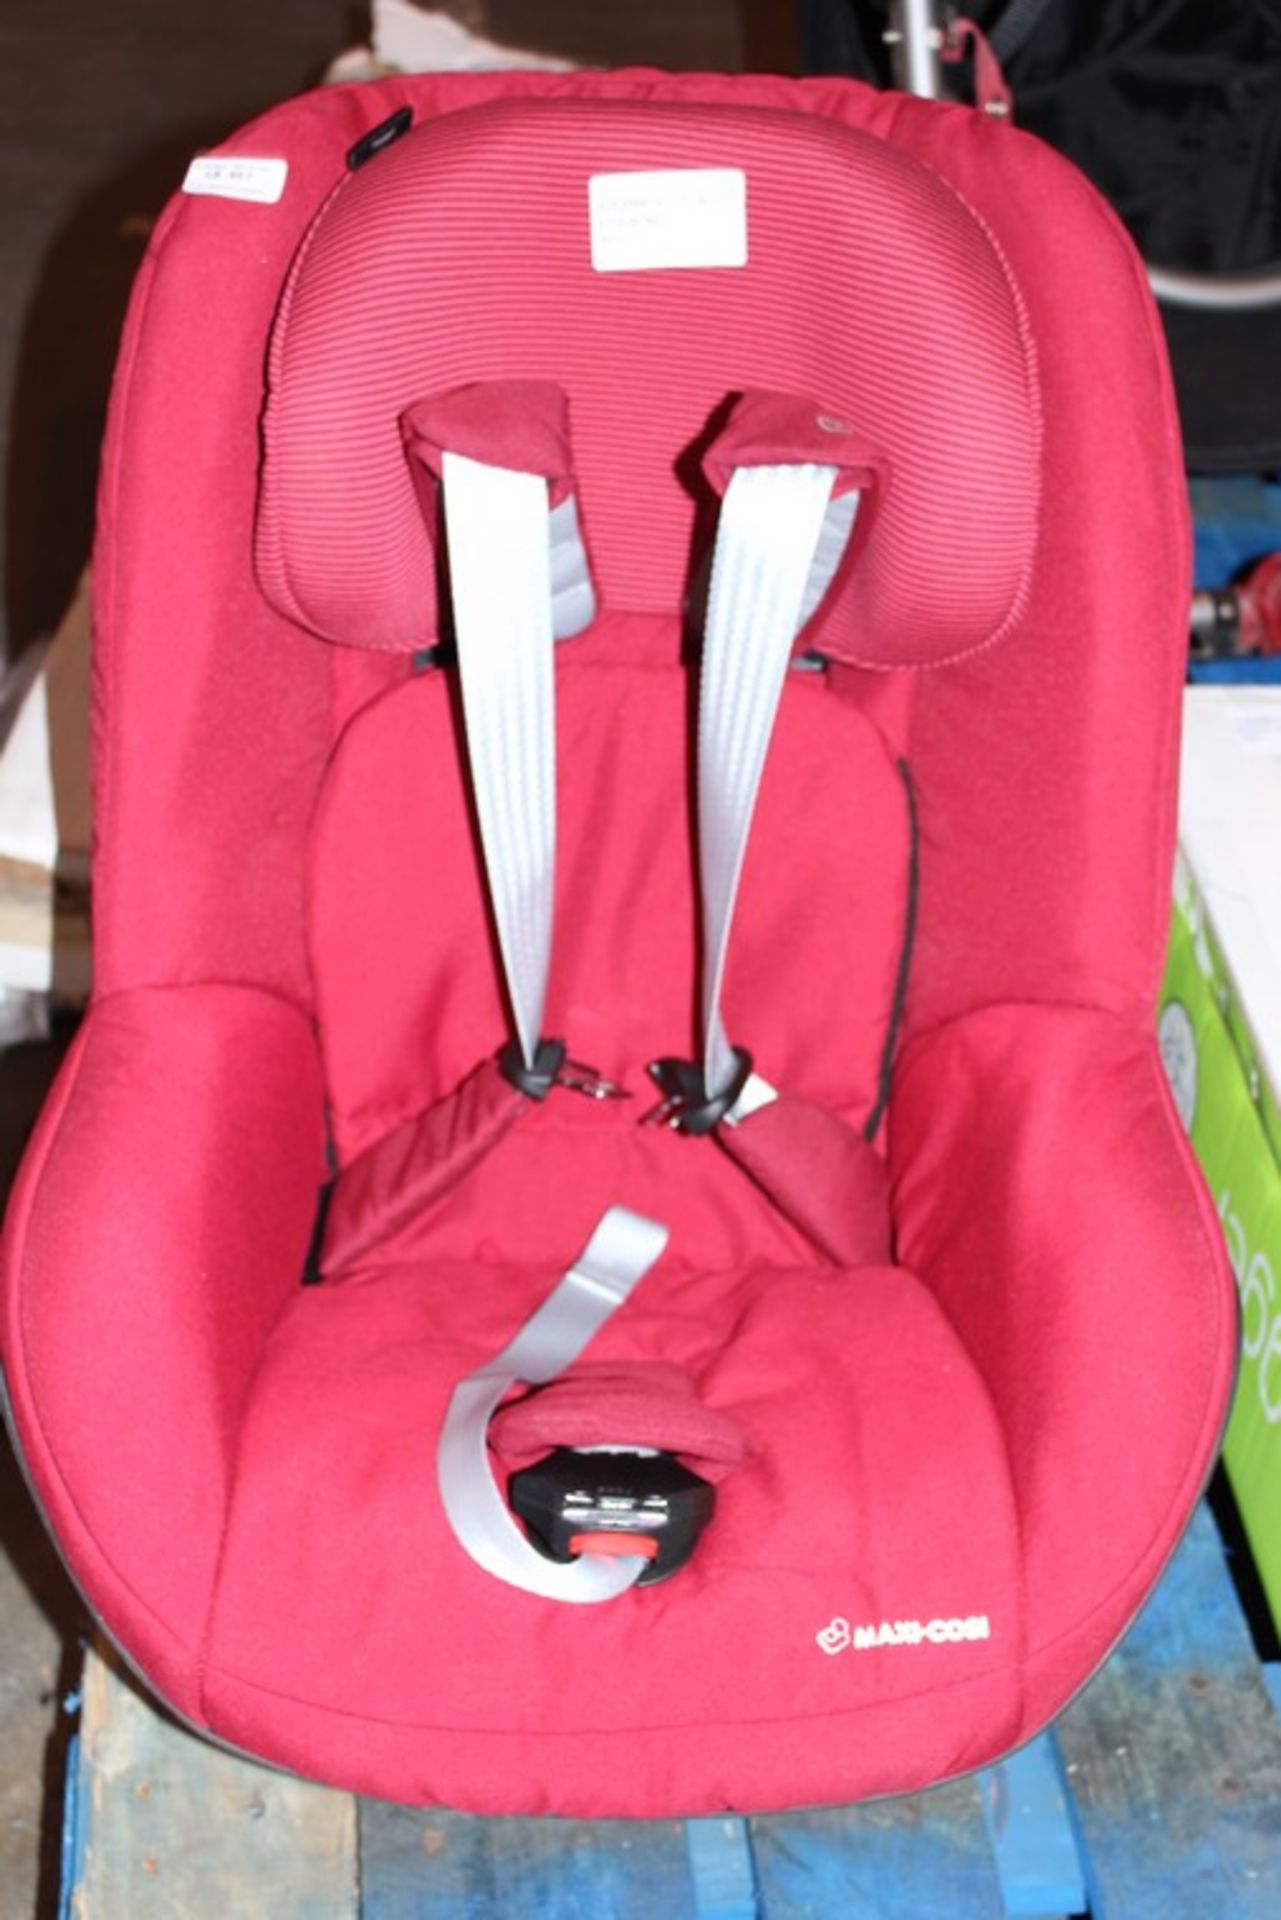 1 x MAXI COSY PEARL CAR SEAT IN RED RRP £150 (17.10.17) (3772675) *PLEASE NOTE THAT THE BID PRICE IS